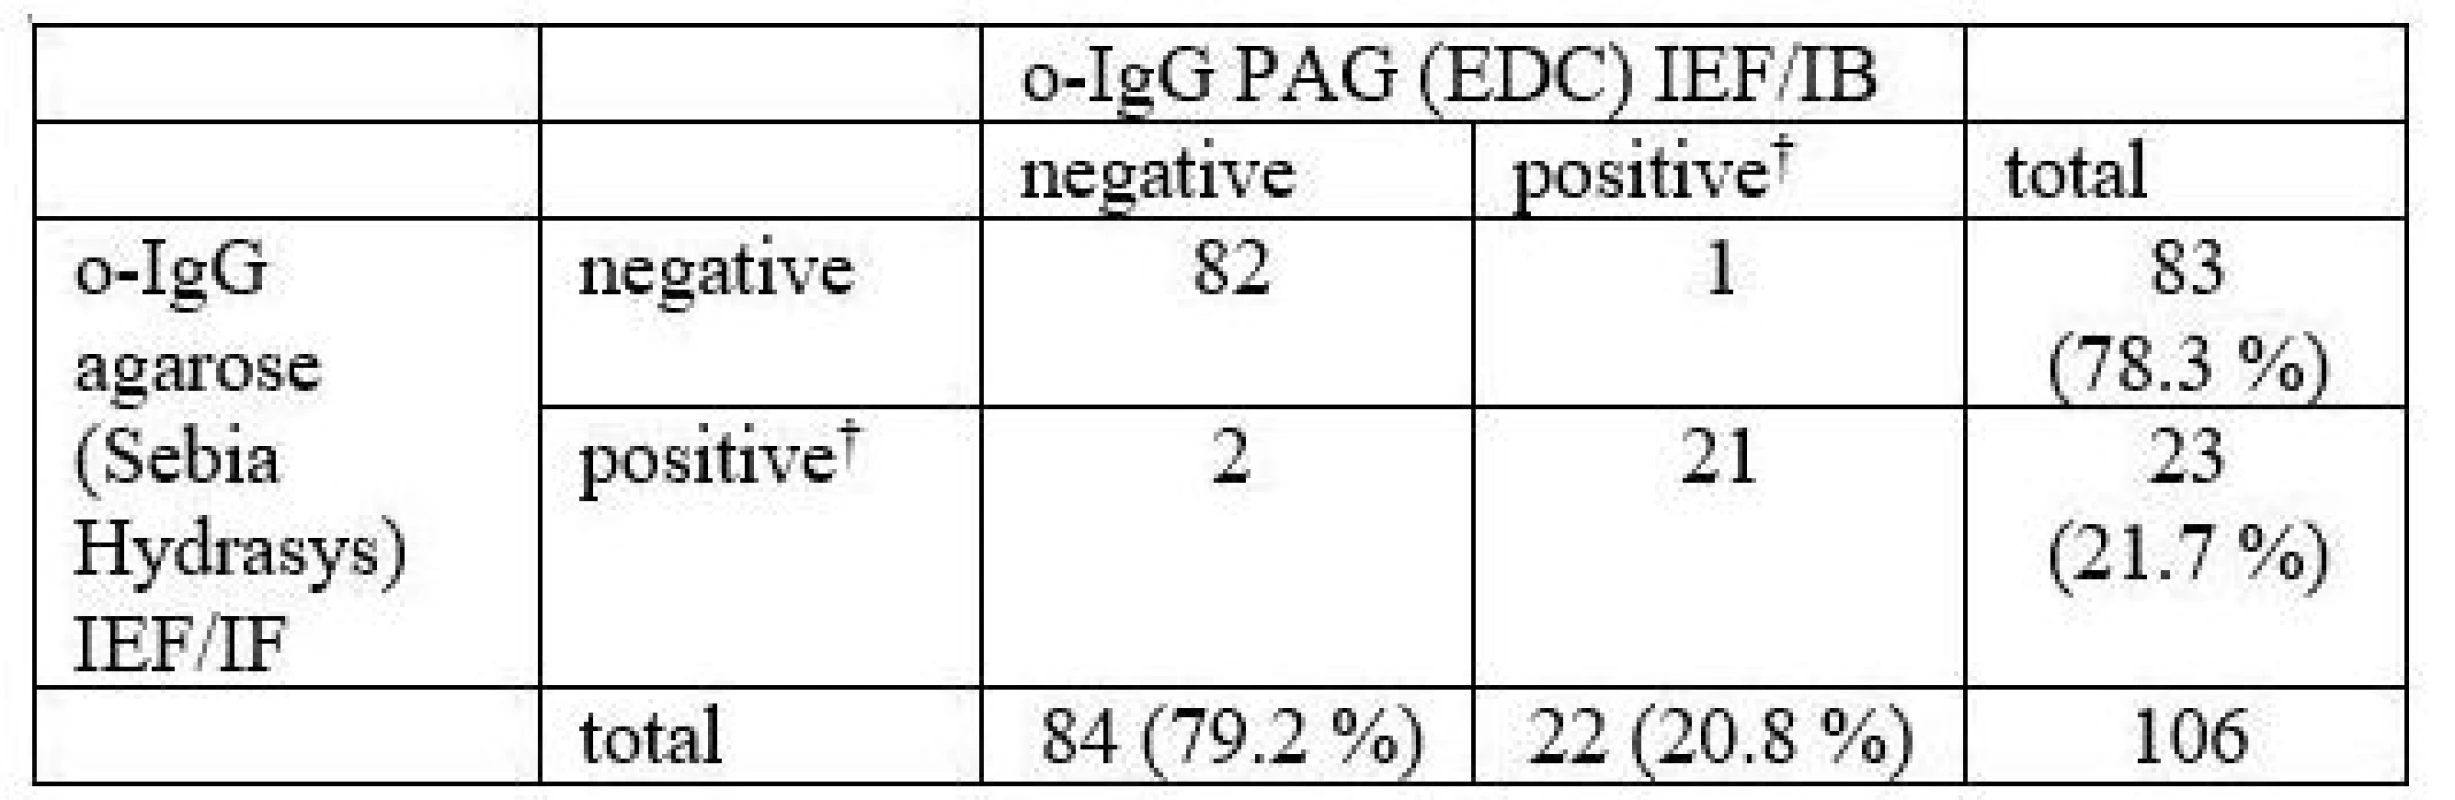  Comparison between agarose IEF/IF and PAG IEF/IB. Chi-squared 88.052, P < 0.0001. κ = 0.9154, 95% CI 0.8211–1.0000.